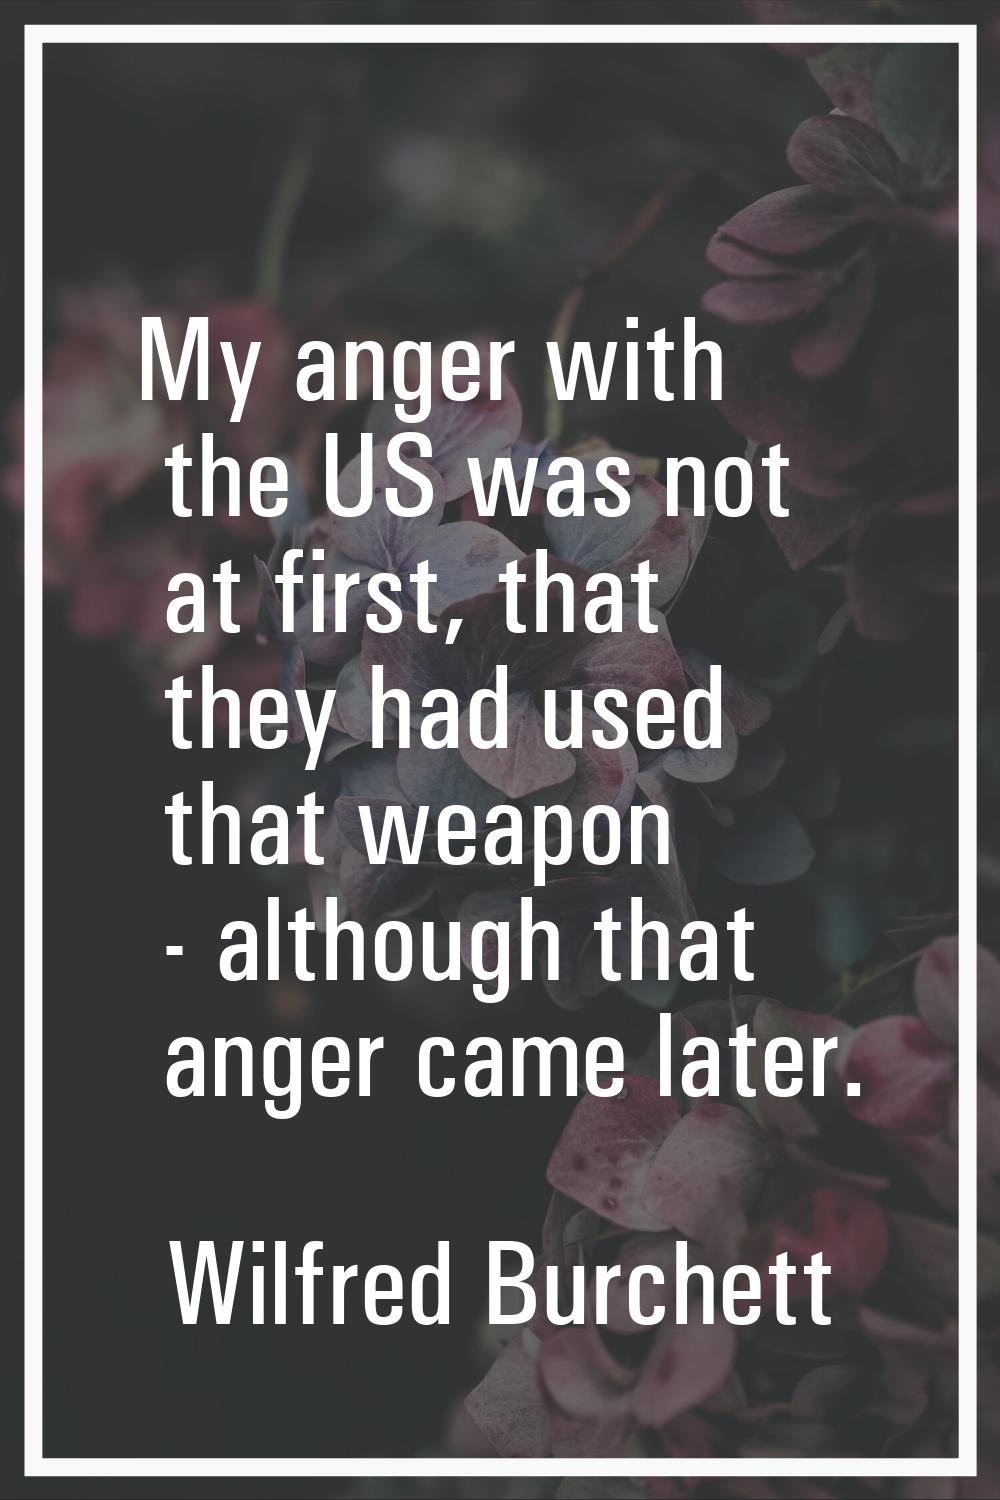 My anger with the US was not at first, that they had used that weapon - although that anger came la